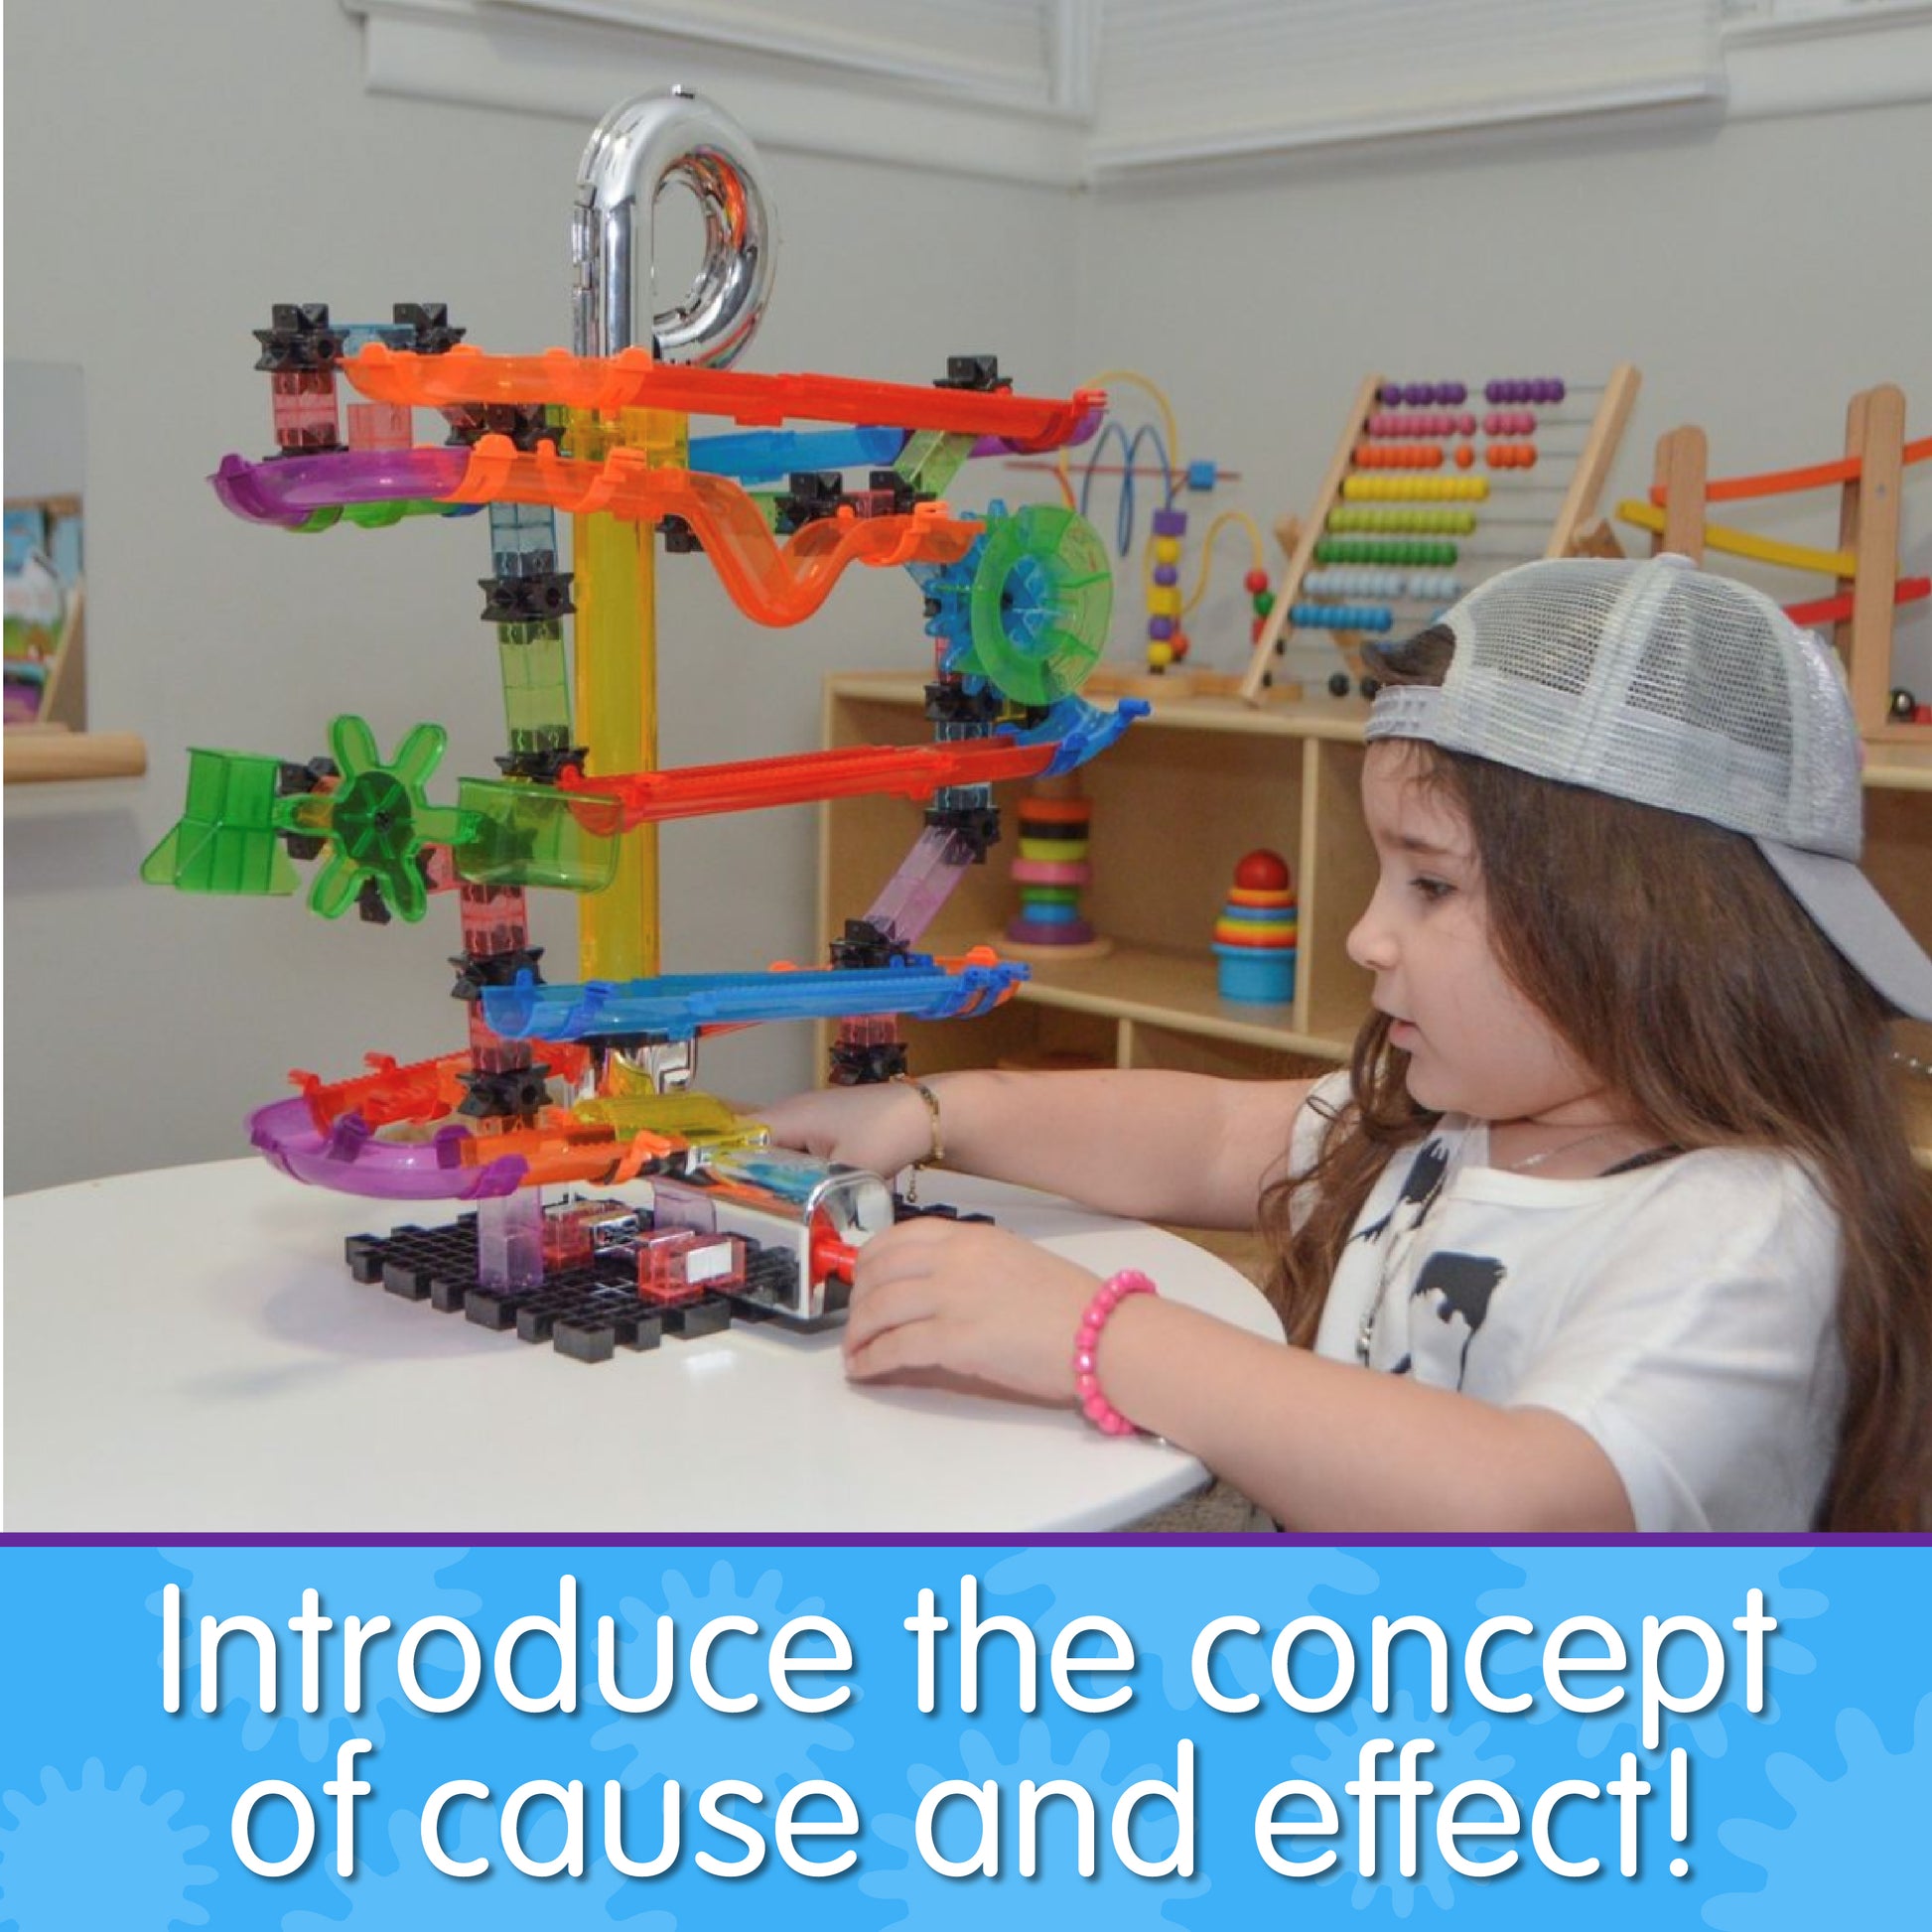 Infographic with young girl playing with HotShot that says, "Introduce the concept of cause and effect!"